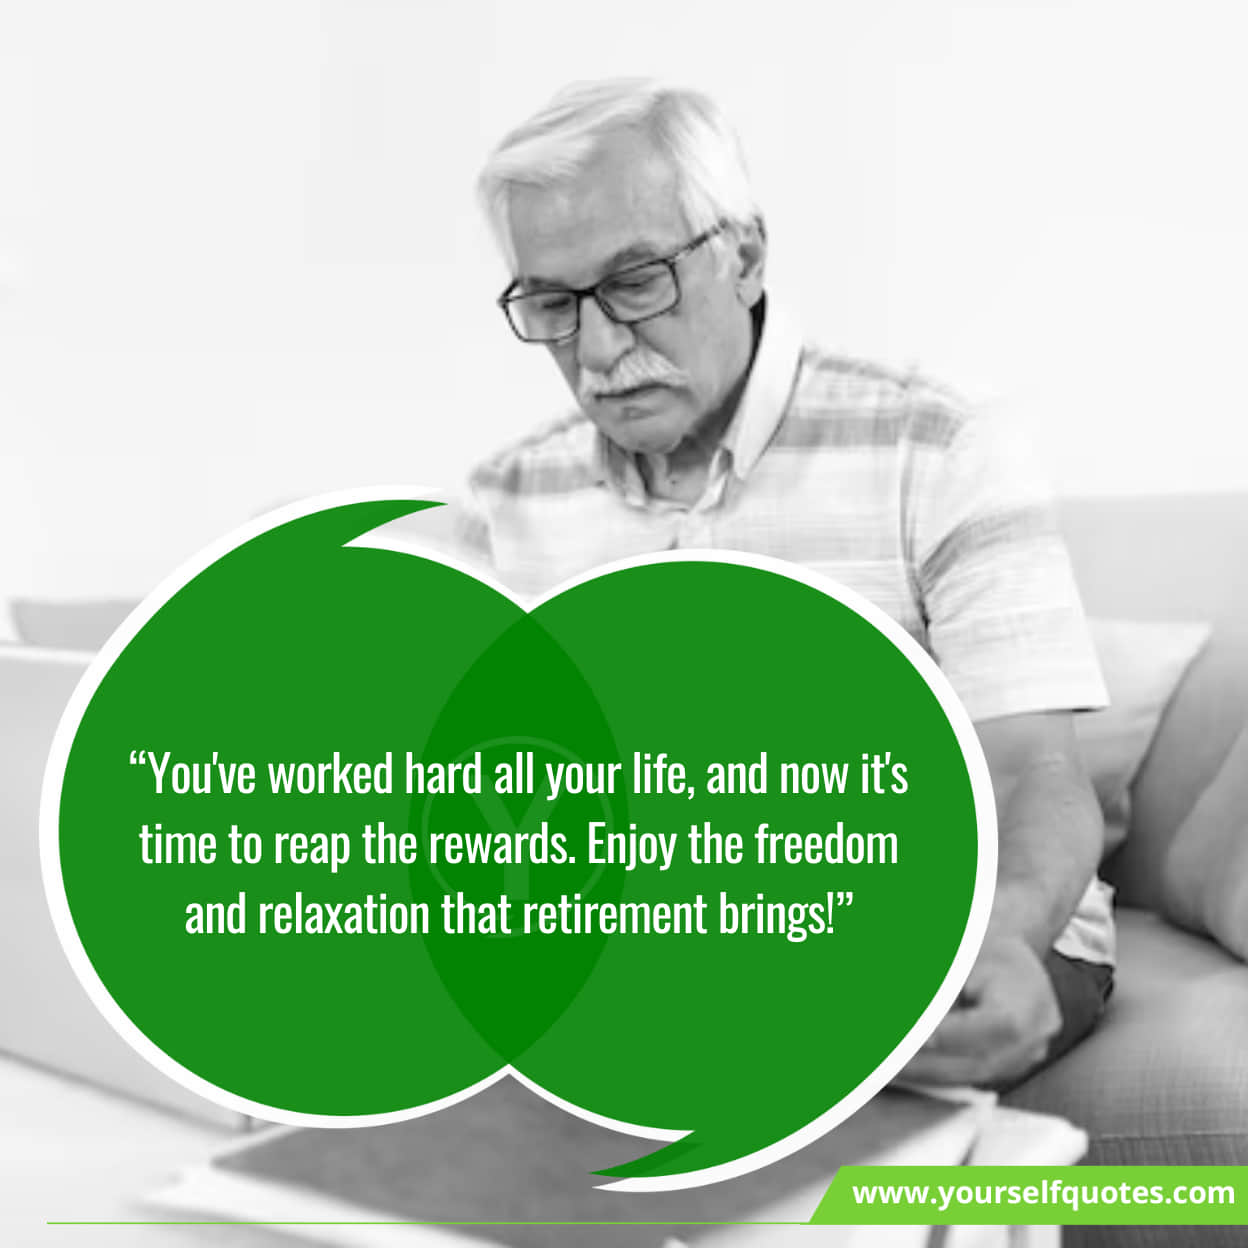 Inspirational retirement quotes and sayings